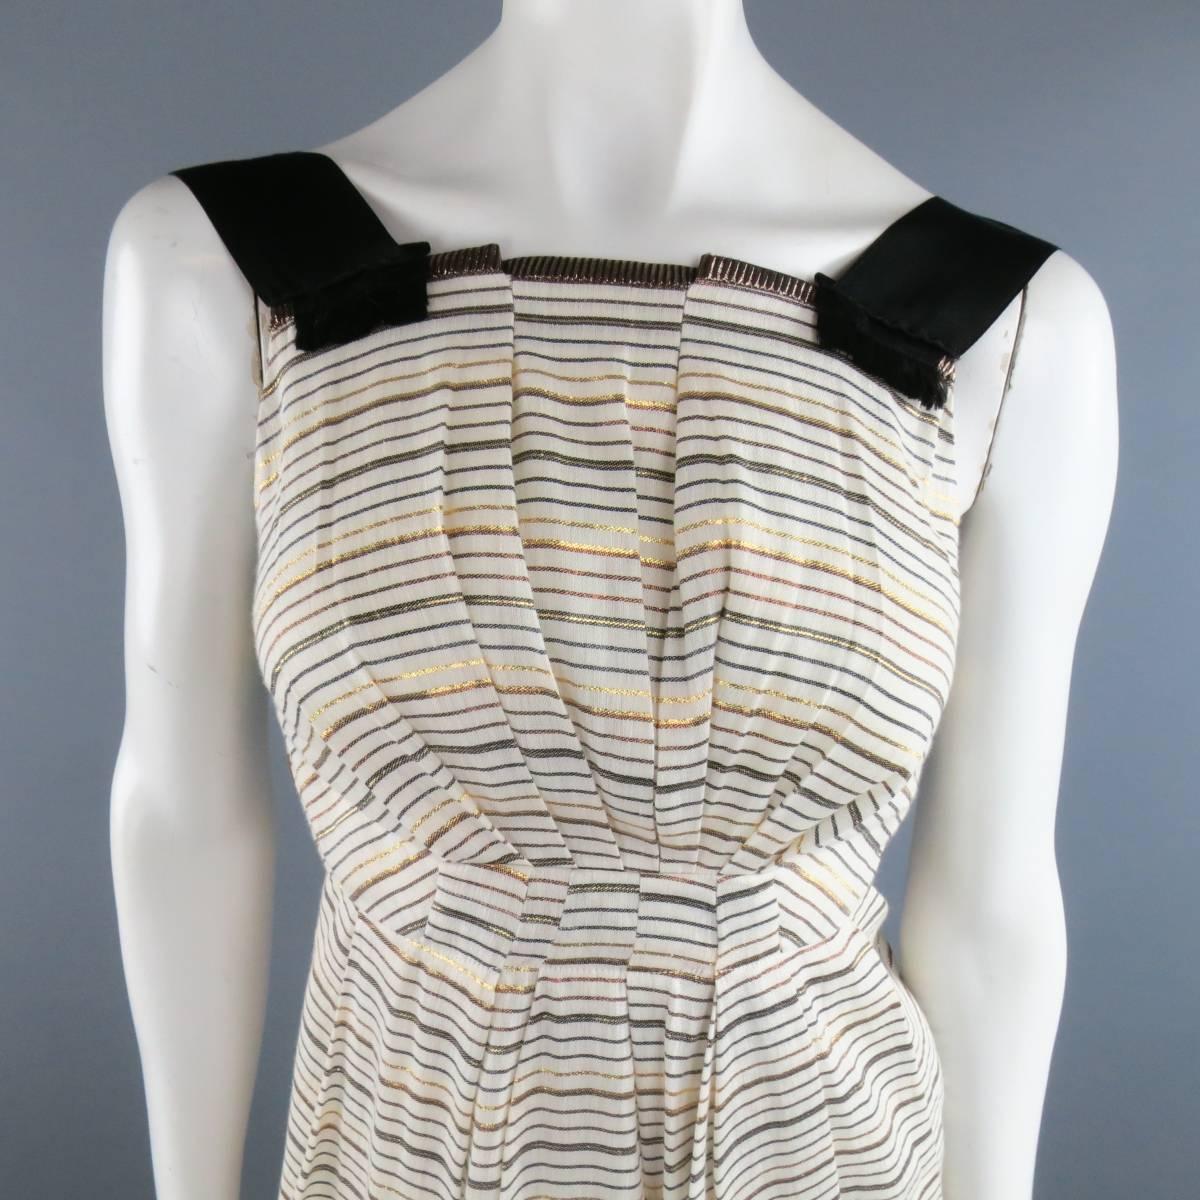 MARC JACOBS dress in a light cream khaki linen with metallic gold, navy, and brown stripes and features thick black ribbon straps, pleating details throughout, and asymmetrical back. Made in USA.
 
Excellent Pre-Owned Condition.
Marked: 2
